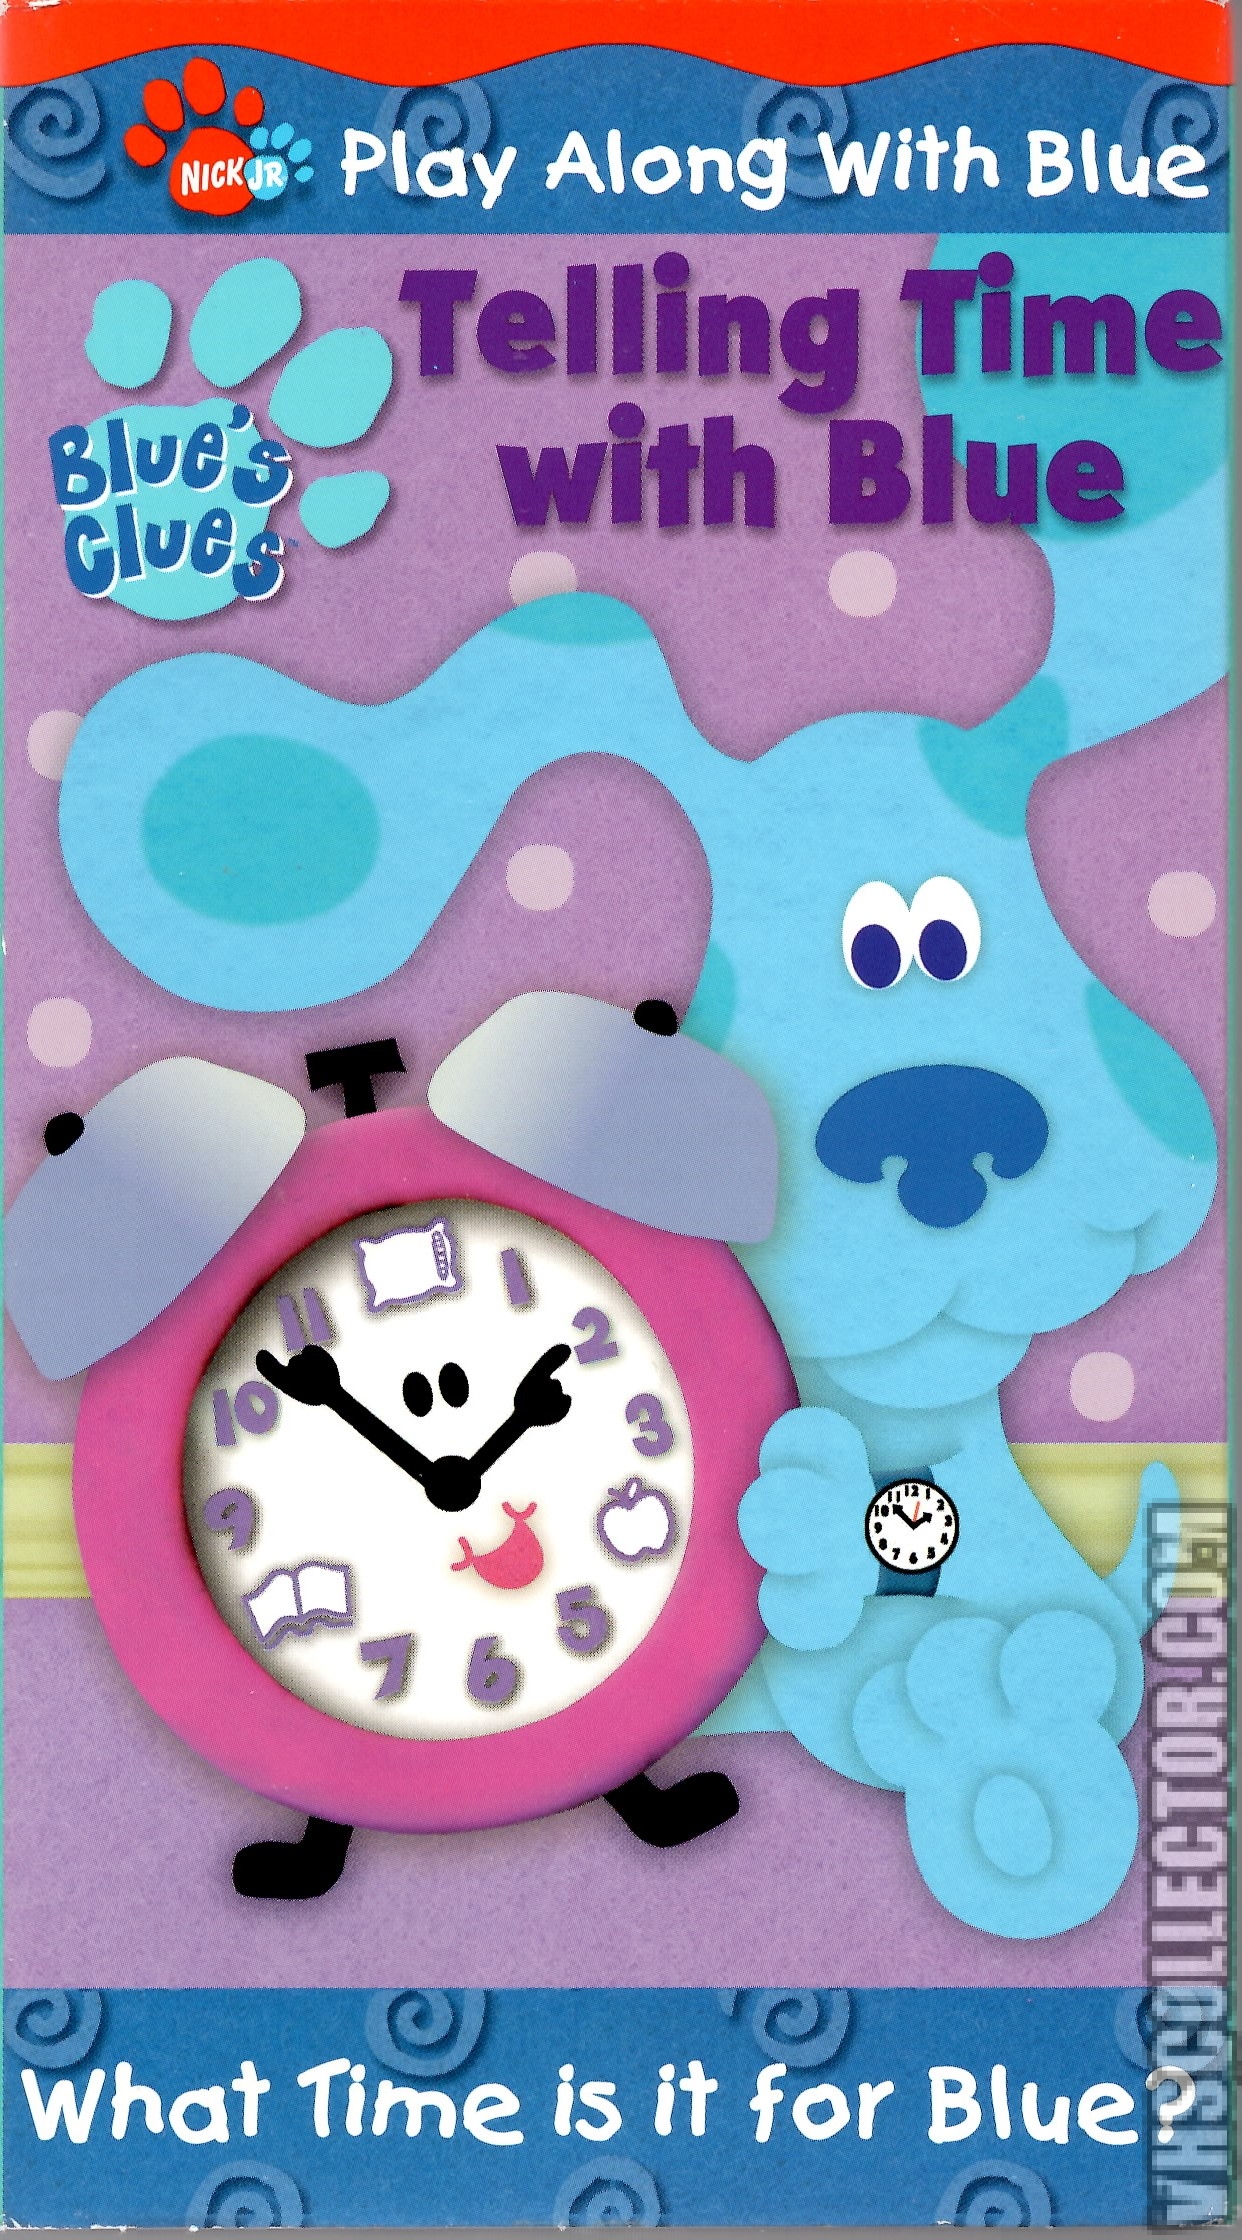 Blue's Clues: Telling Time with Blue. 